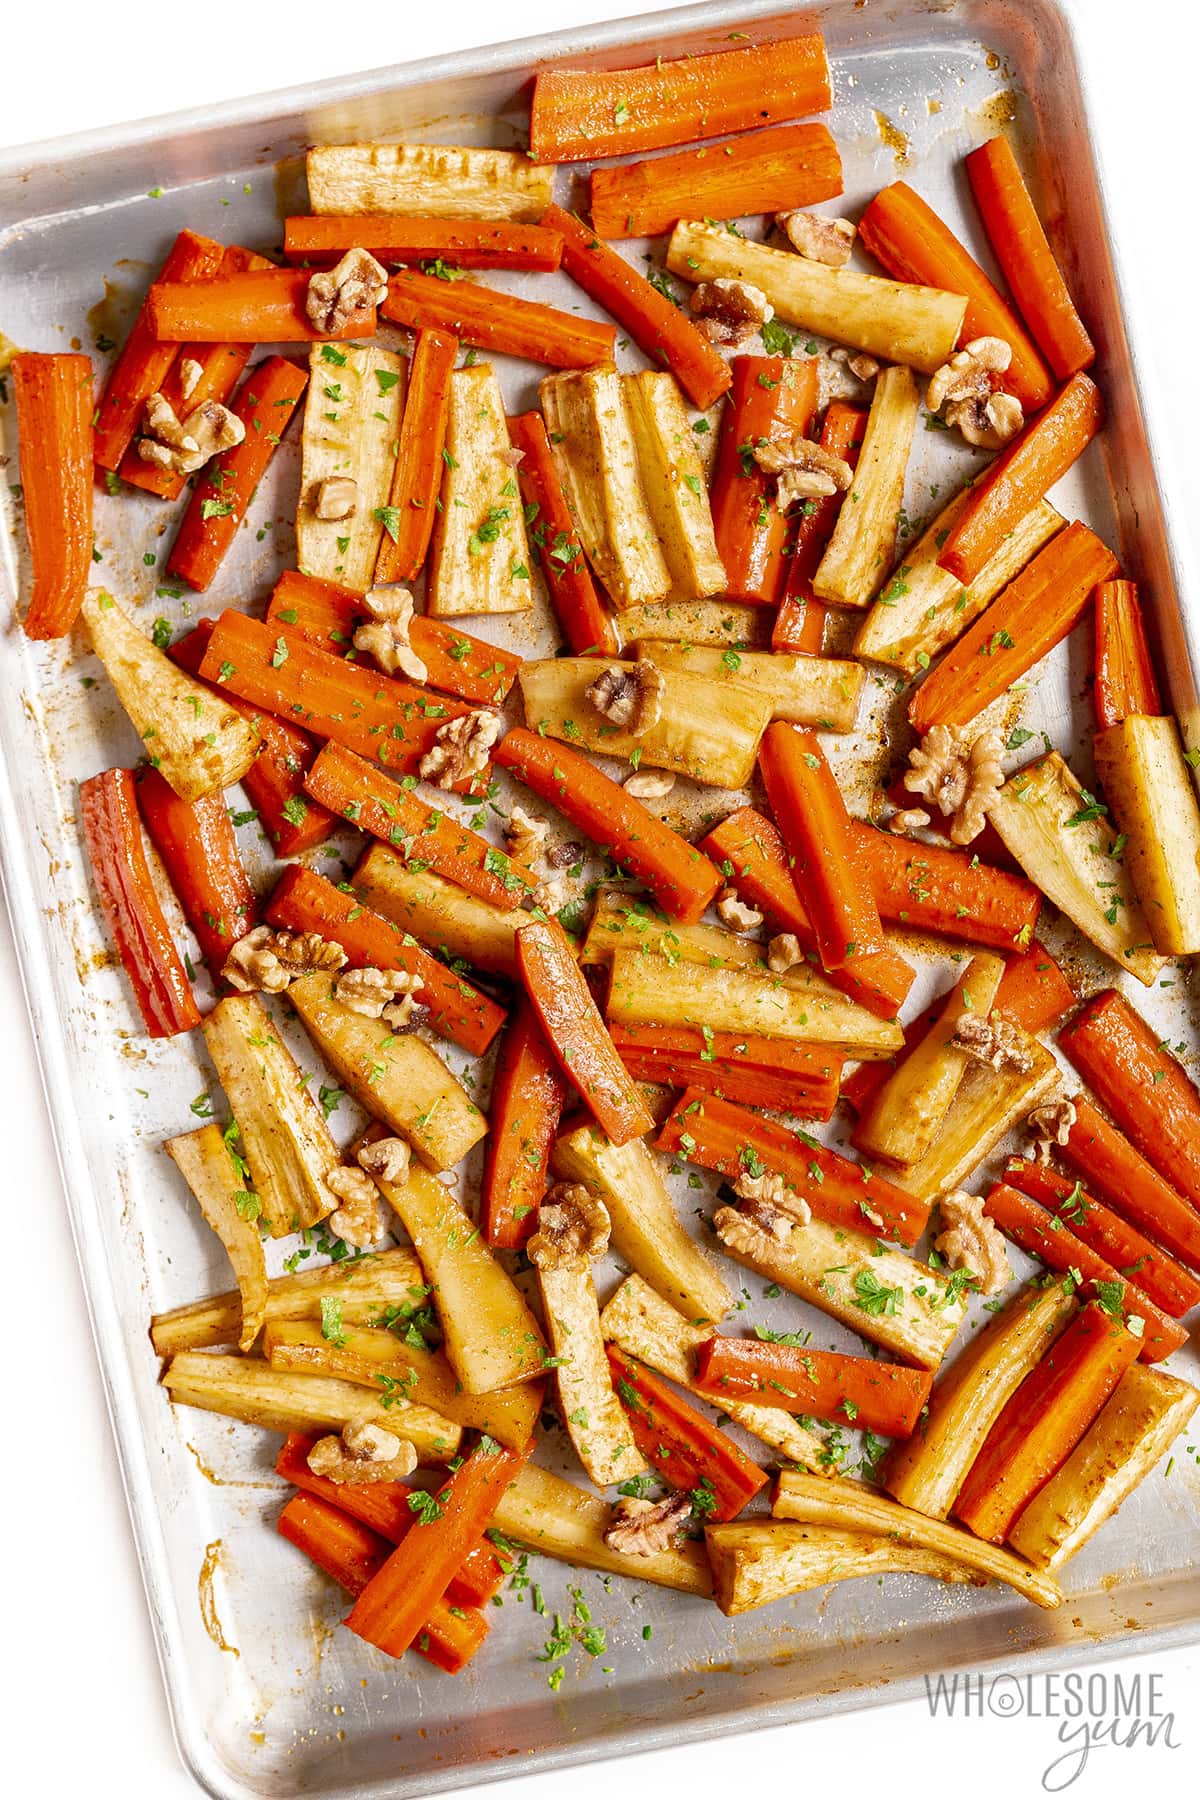 Roasted carrots and parsnips sprinkled with walnuts and parsley.